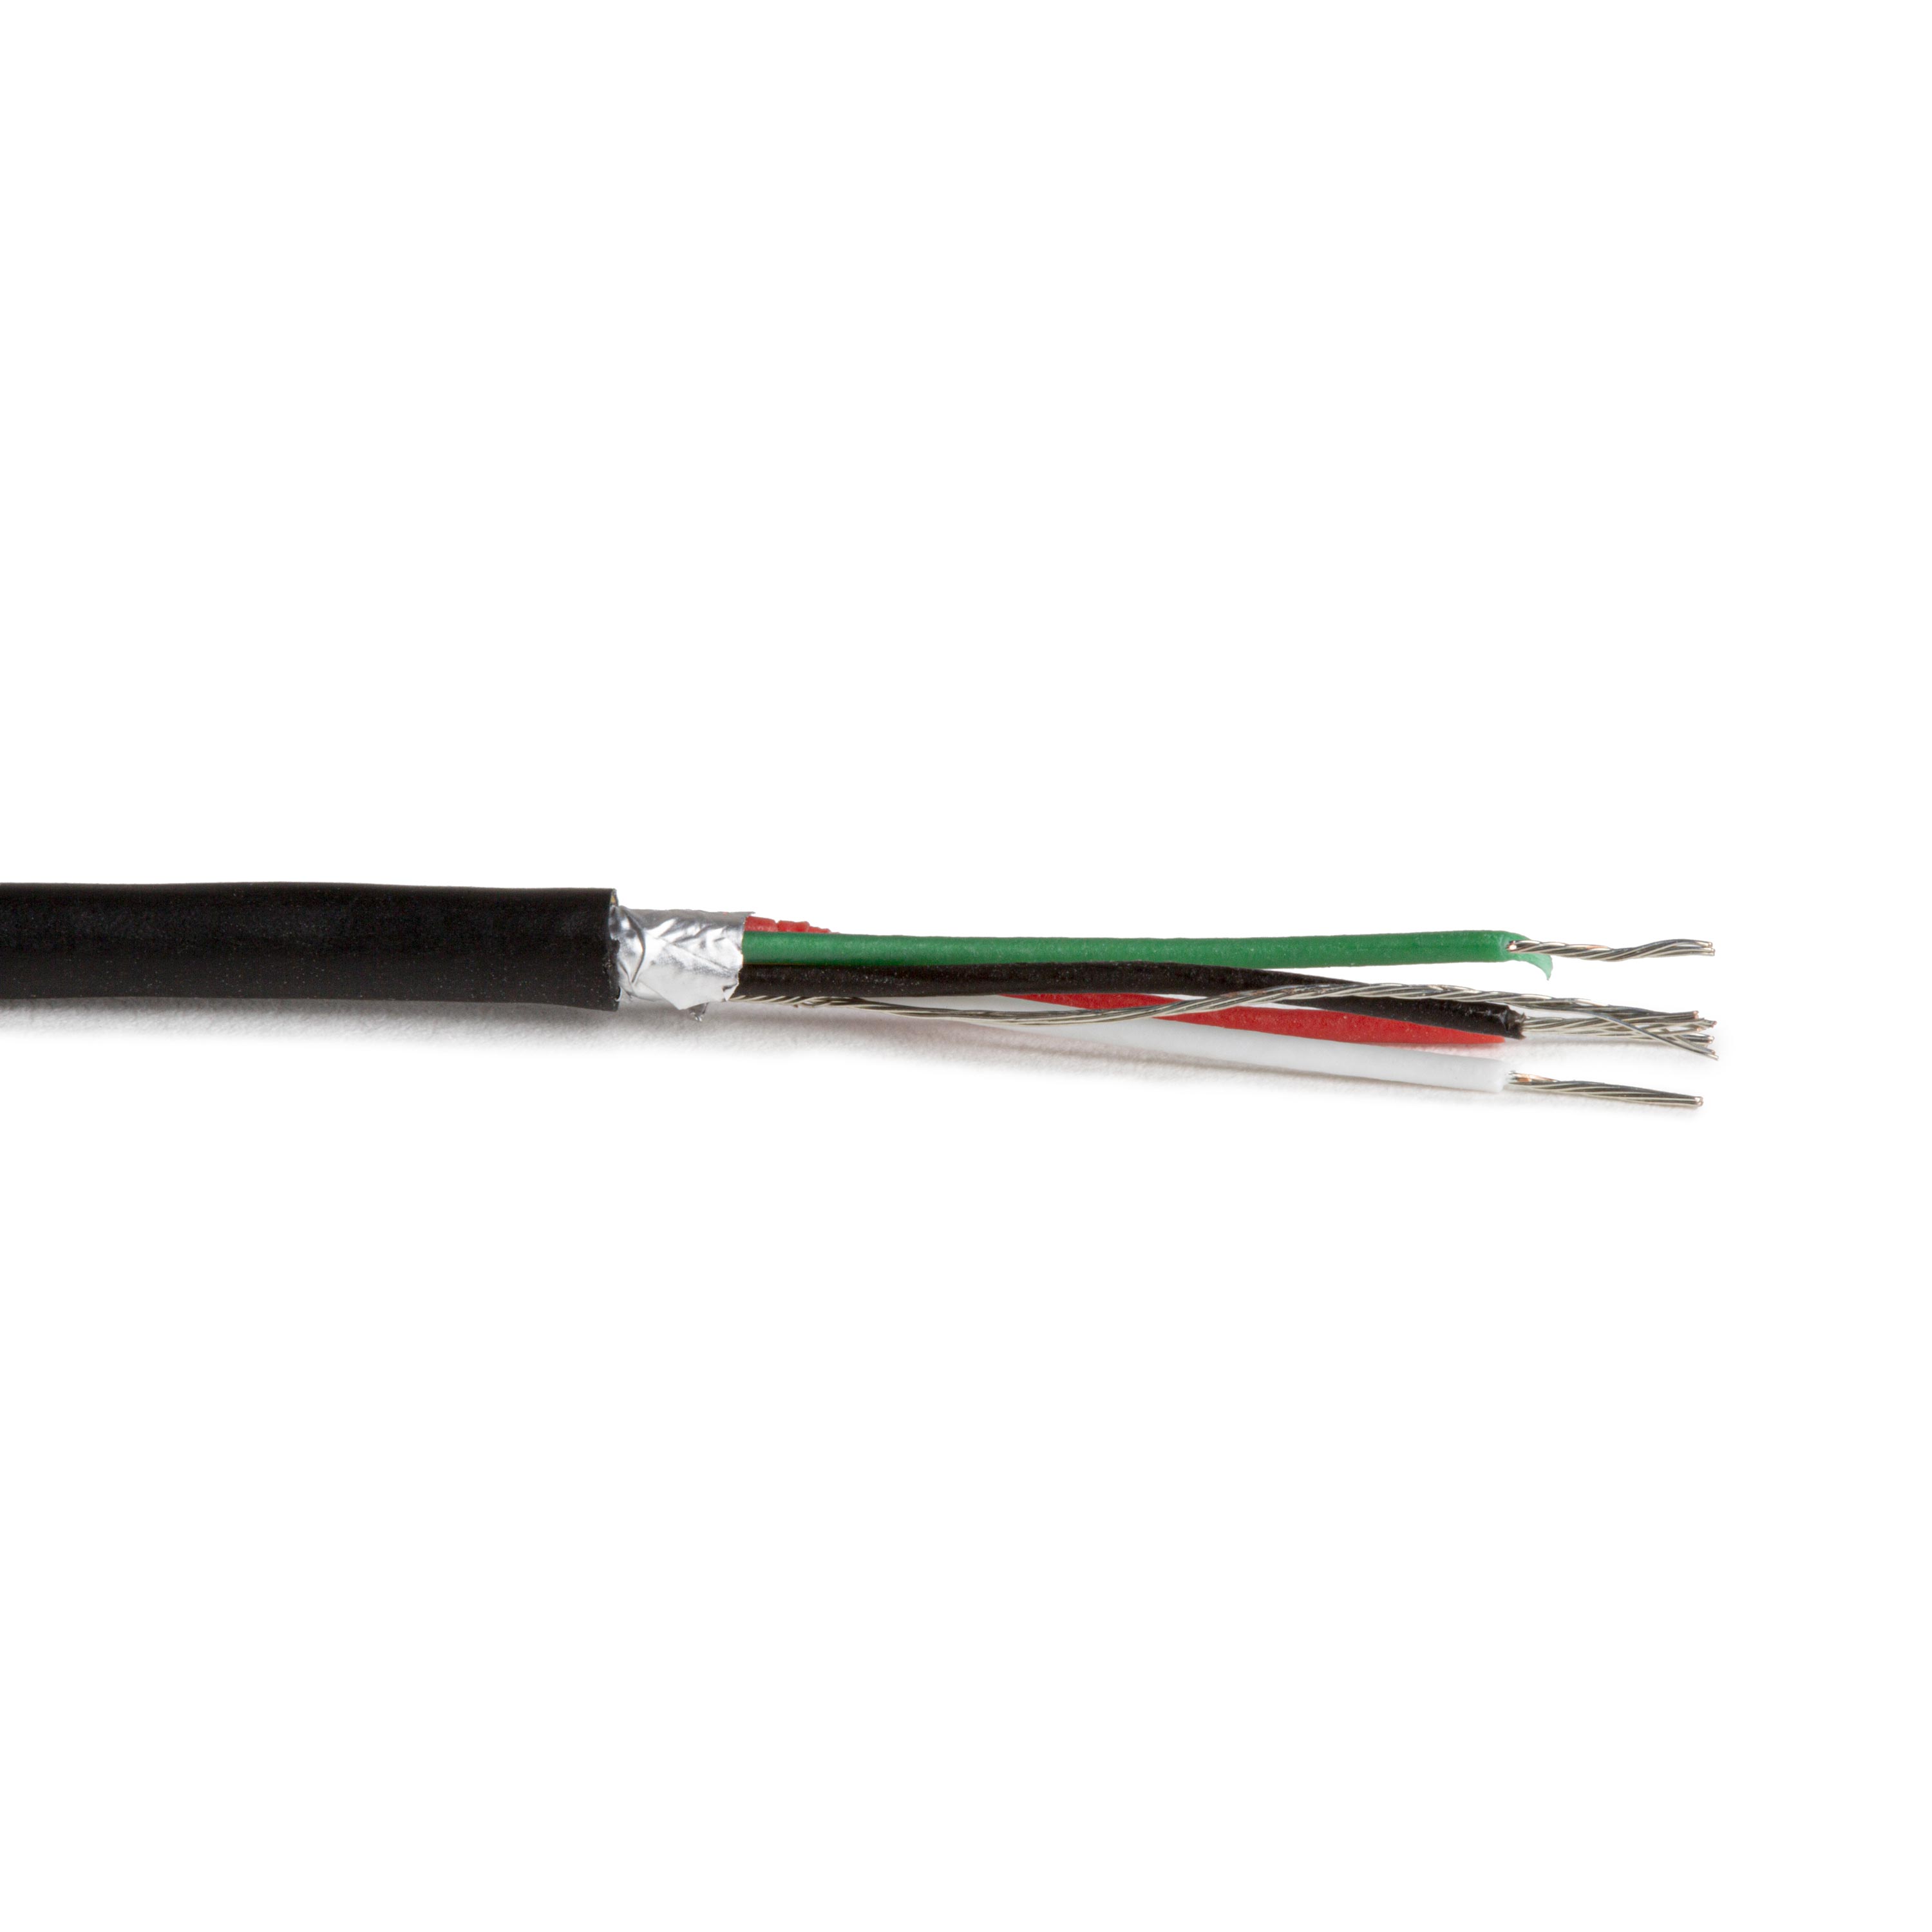 4-Conductor Circuit Wire - 16 inches